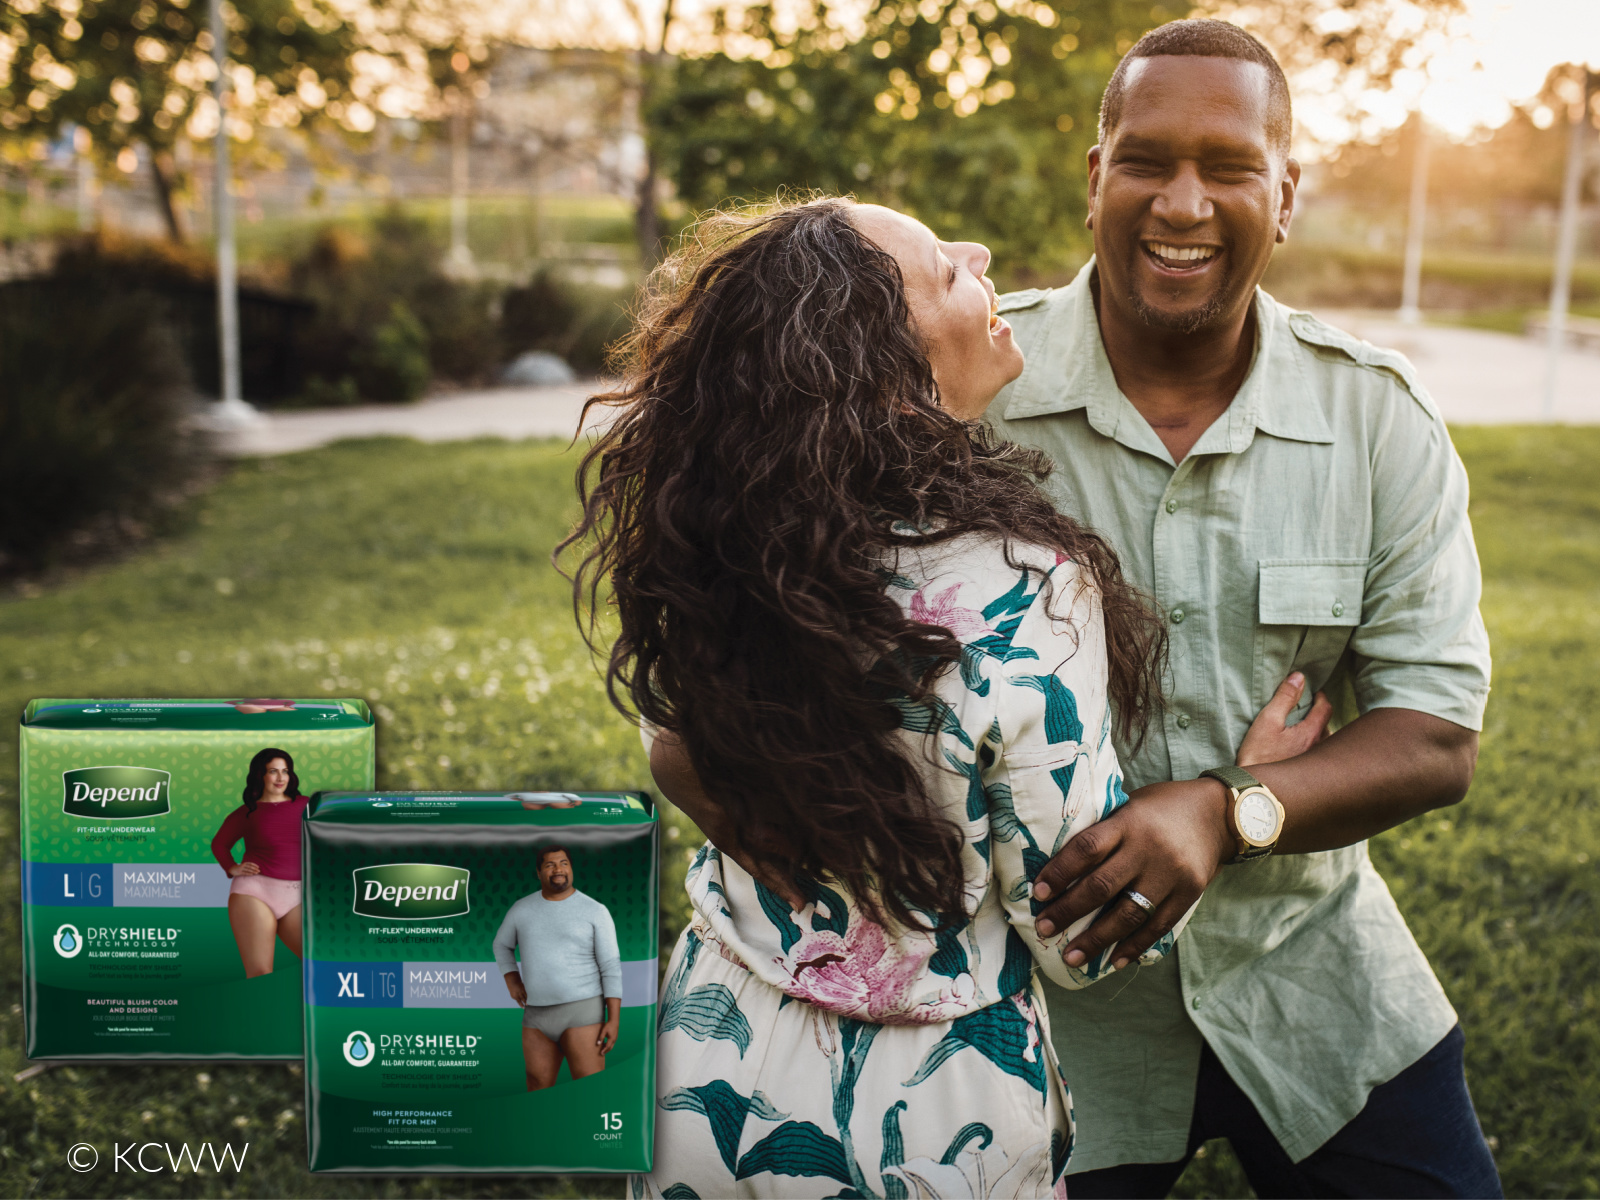 Enjoy All-Day Comfort And Confidence With Depend® - Save $2 At Publix on I Heart Publix